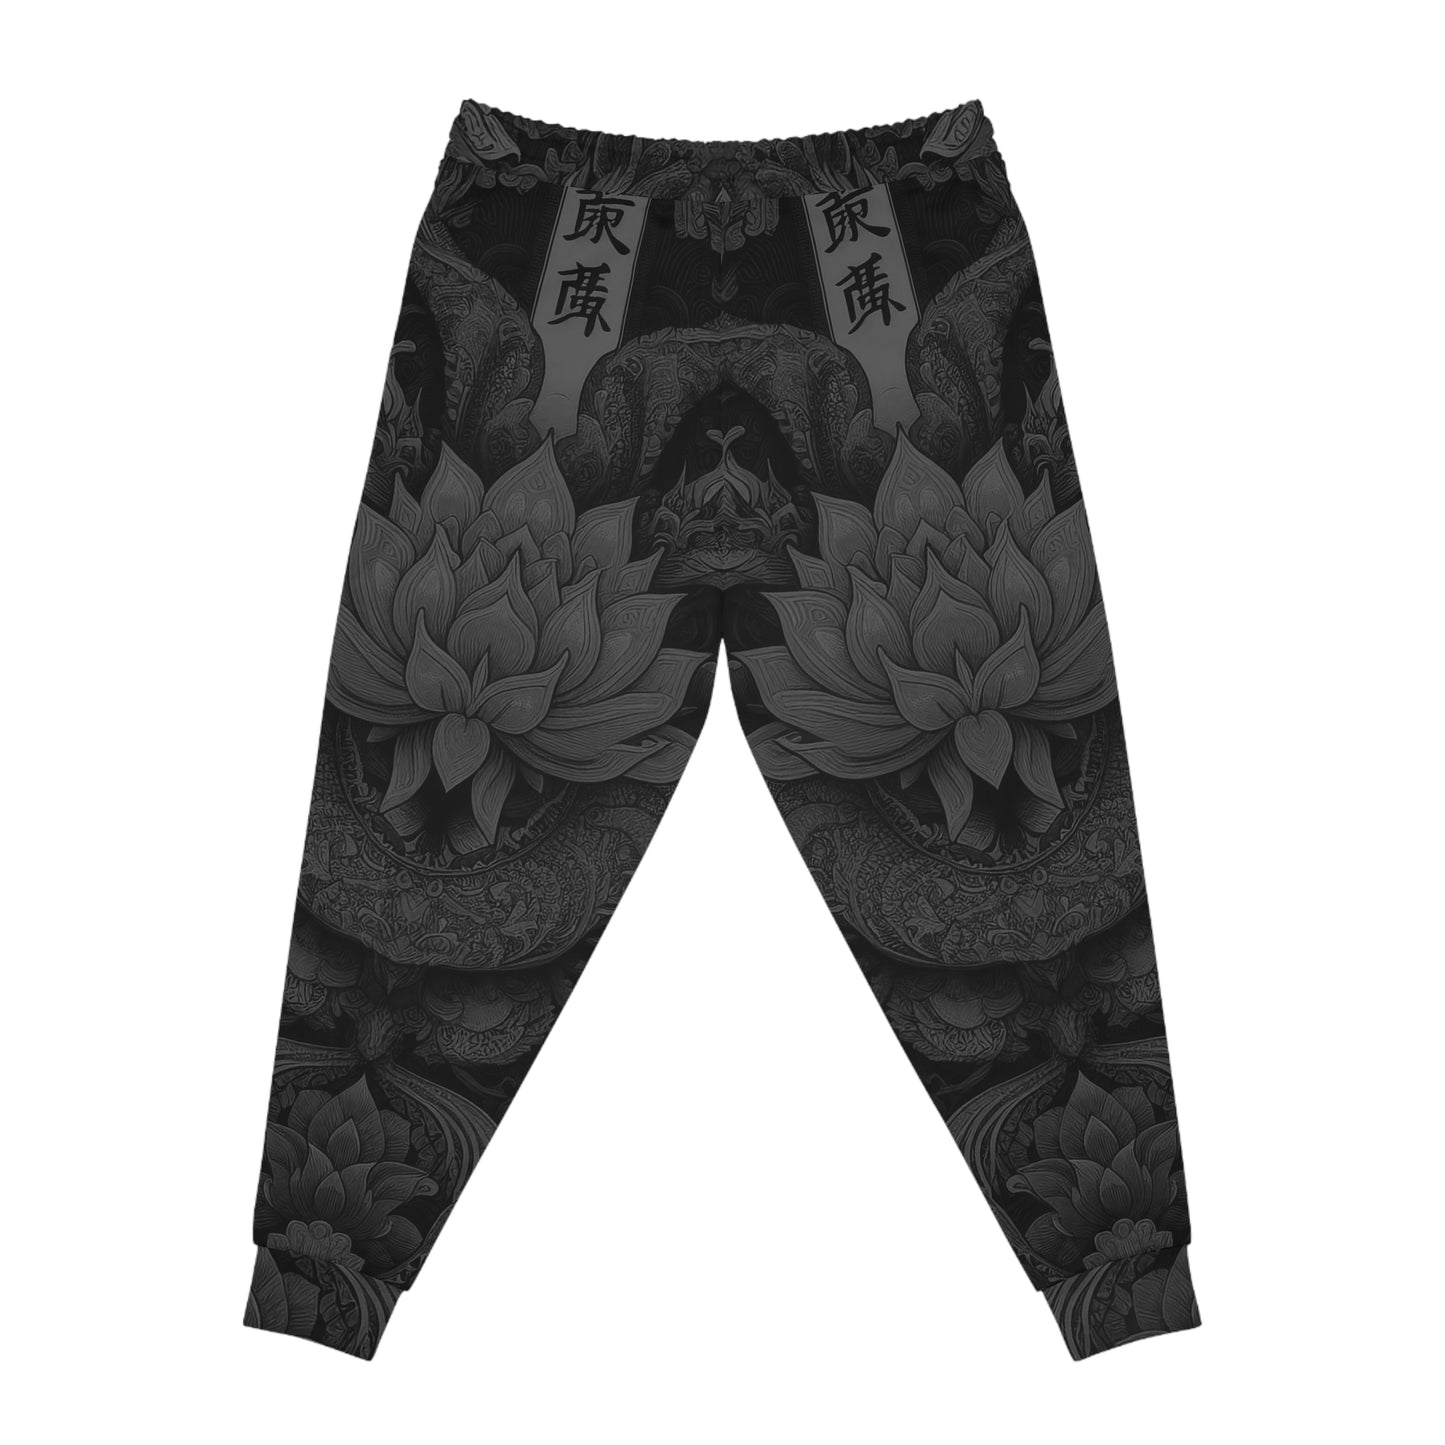 DISOBEY Athletic Joggers (LOTUSFACE BLACK)